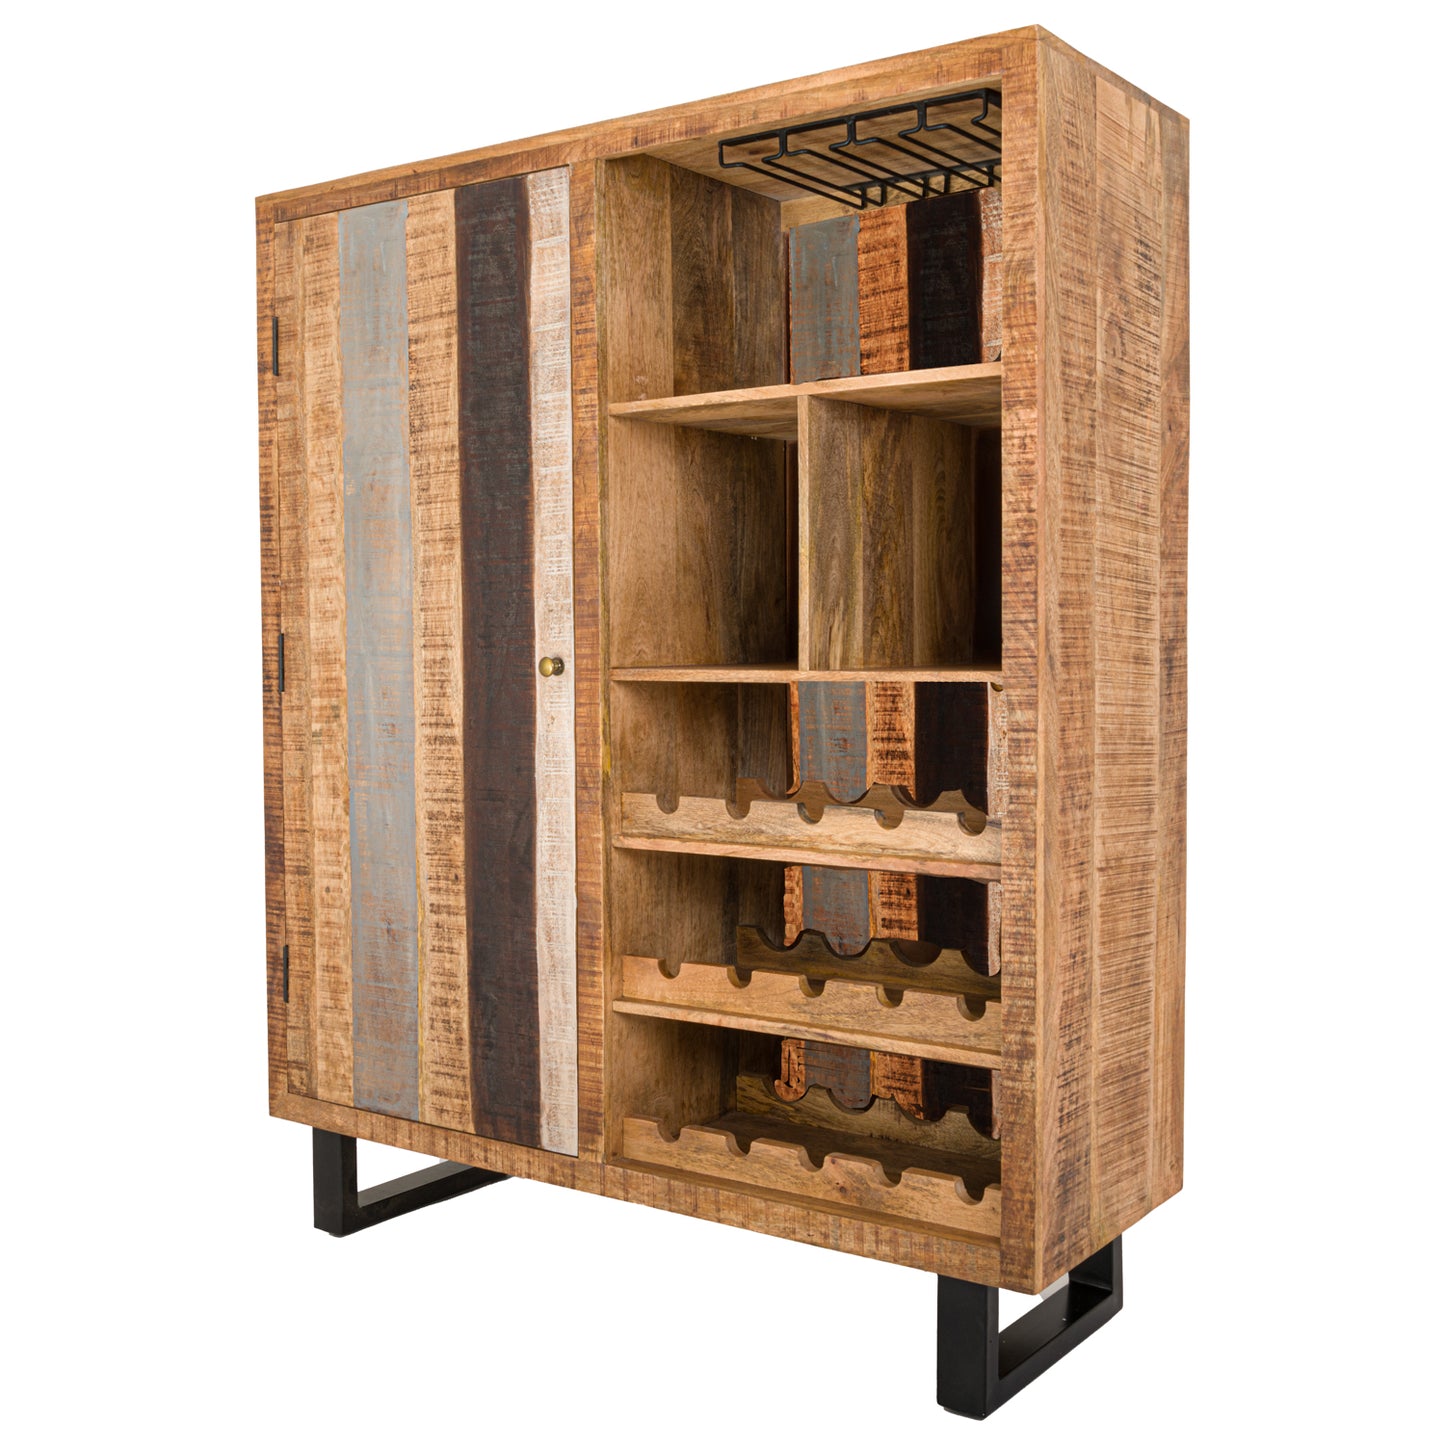 Industrial Style Drinks Cabinet - Reclaimed Wood Effect - mancavesuperstore